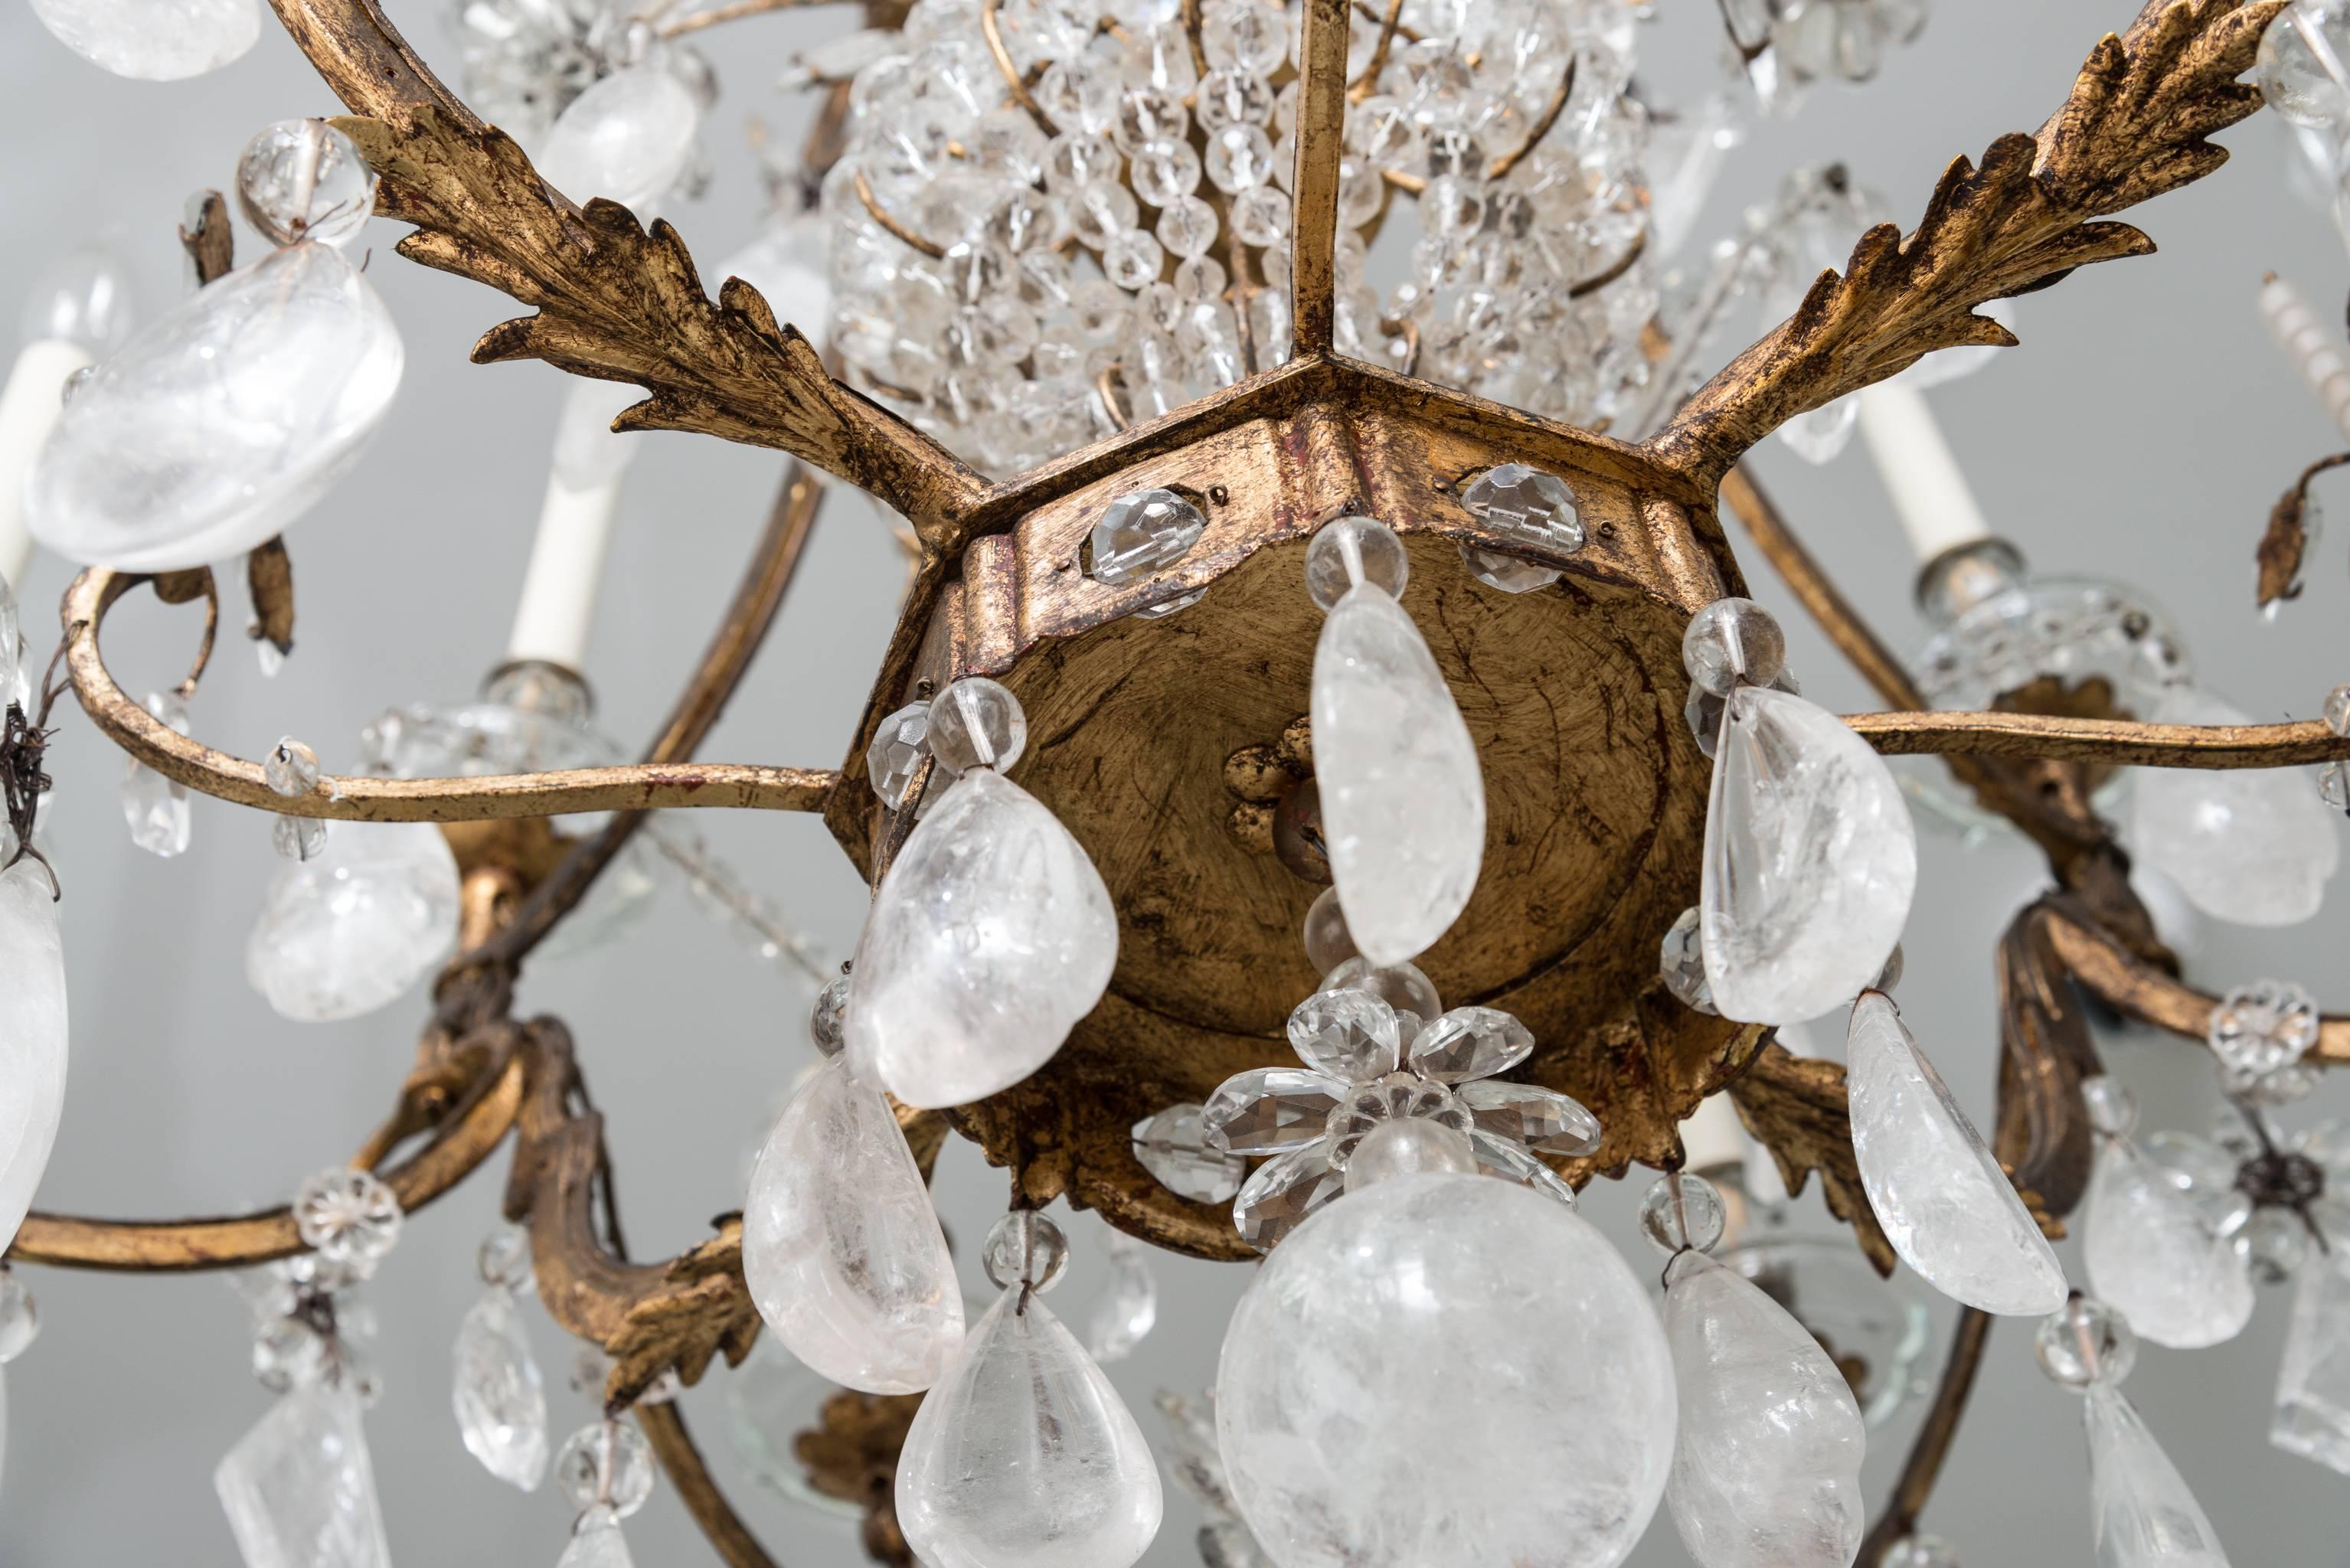 This large-scale, twelve-light Louis XVI style chandelier was created by the iconic firm of Maison Baguès of France. The piece dates to the 1930s and is fabricated of leaf gilt gold iron and a combination of rock crystal and clear crystal prisms